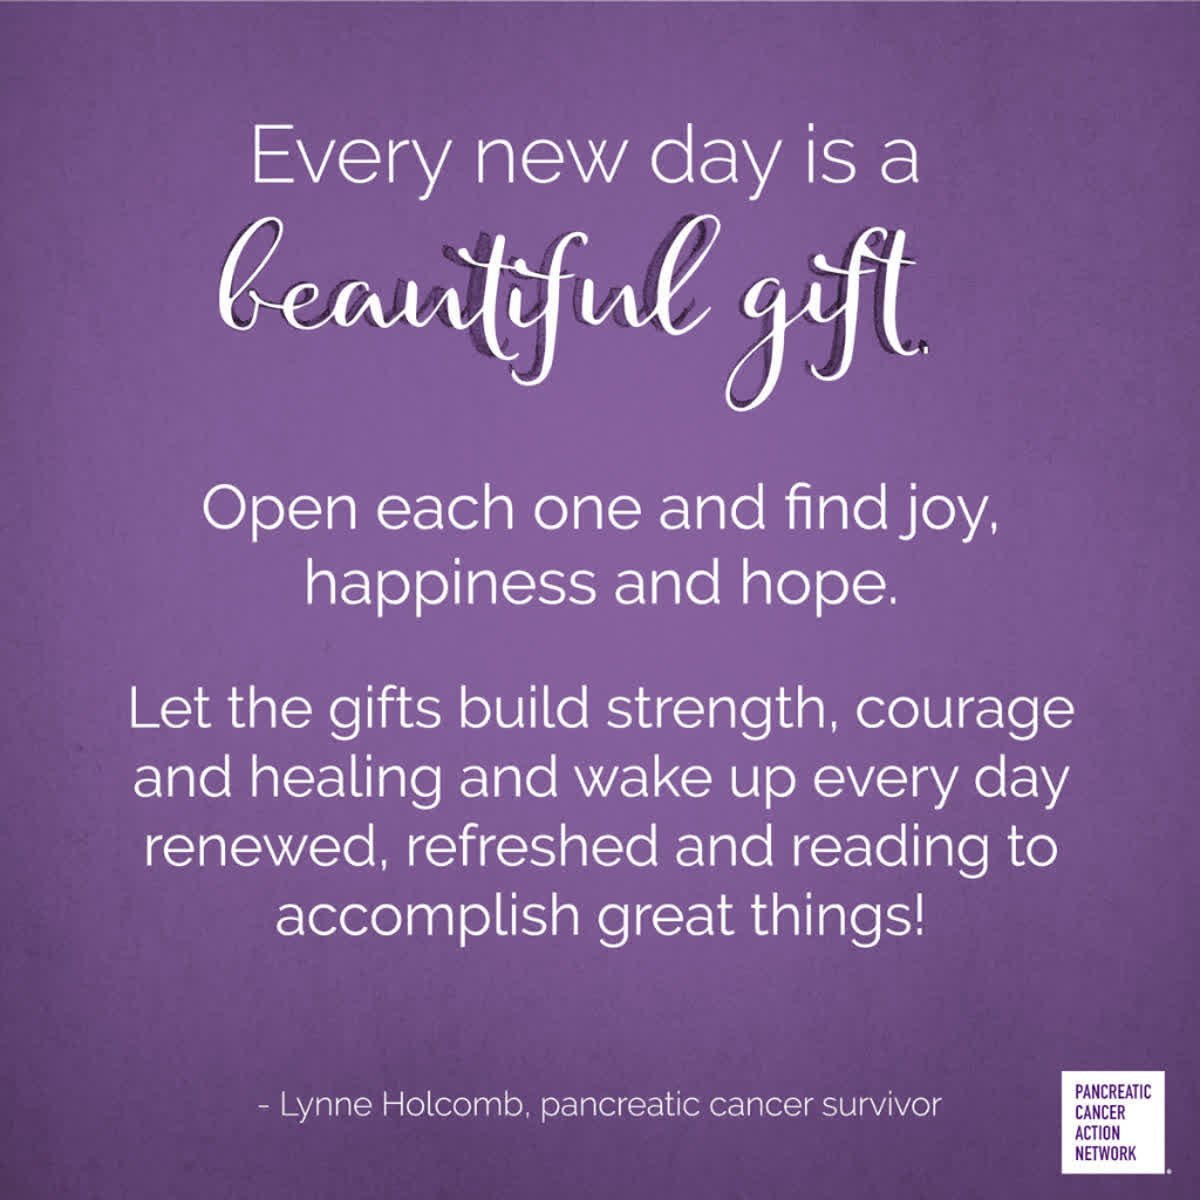 Good morning! Let's pass H.2182, An Act to reduce incidence & death from #PancreaticCancer. Pray & hope but don't delay! Let's keep fighting! Let's accomplish a great thing! #WageHope #DemandBetter #mapoli @repjohnlawn @CindyFriedmanMA @RonMariano @PanCANBoston @ACSCANMA @PanCAN